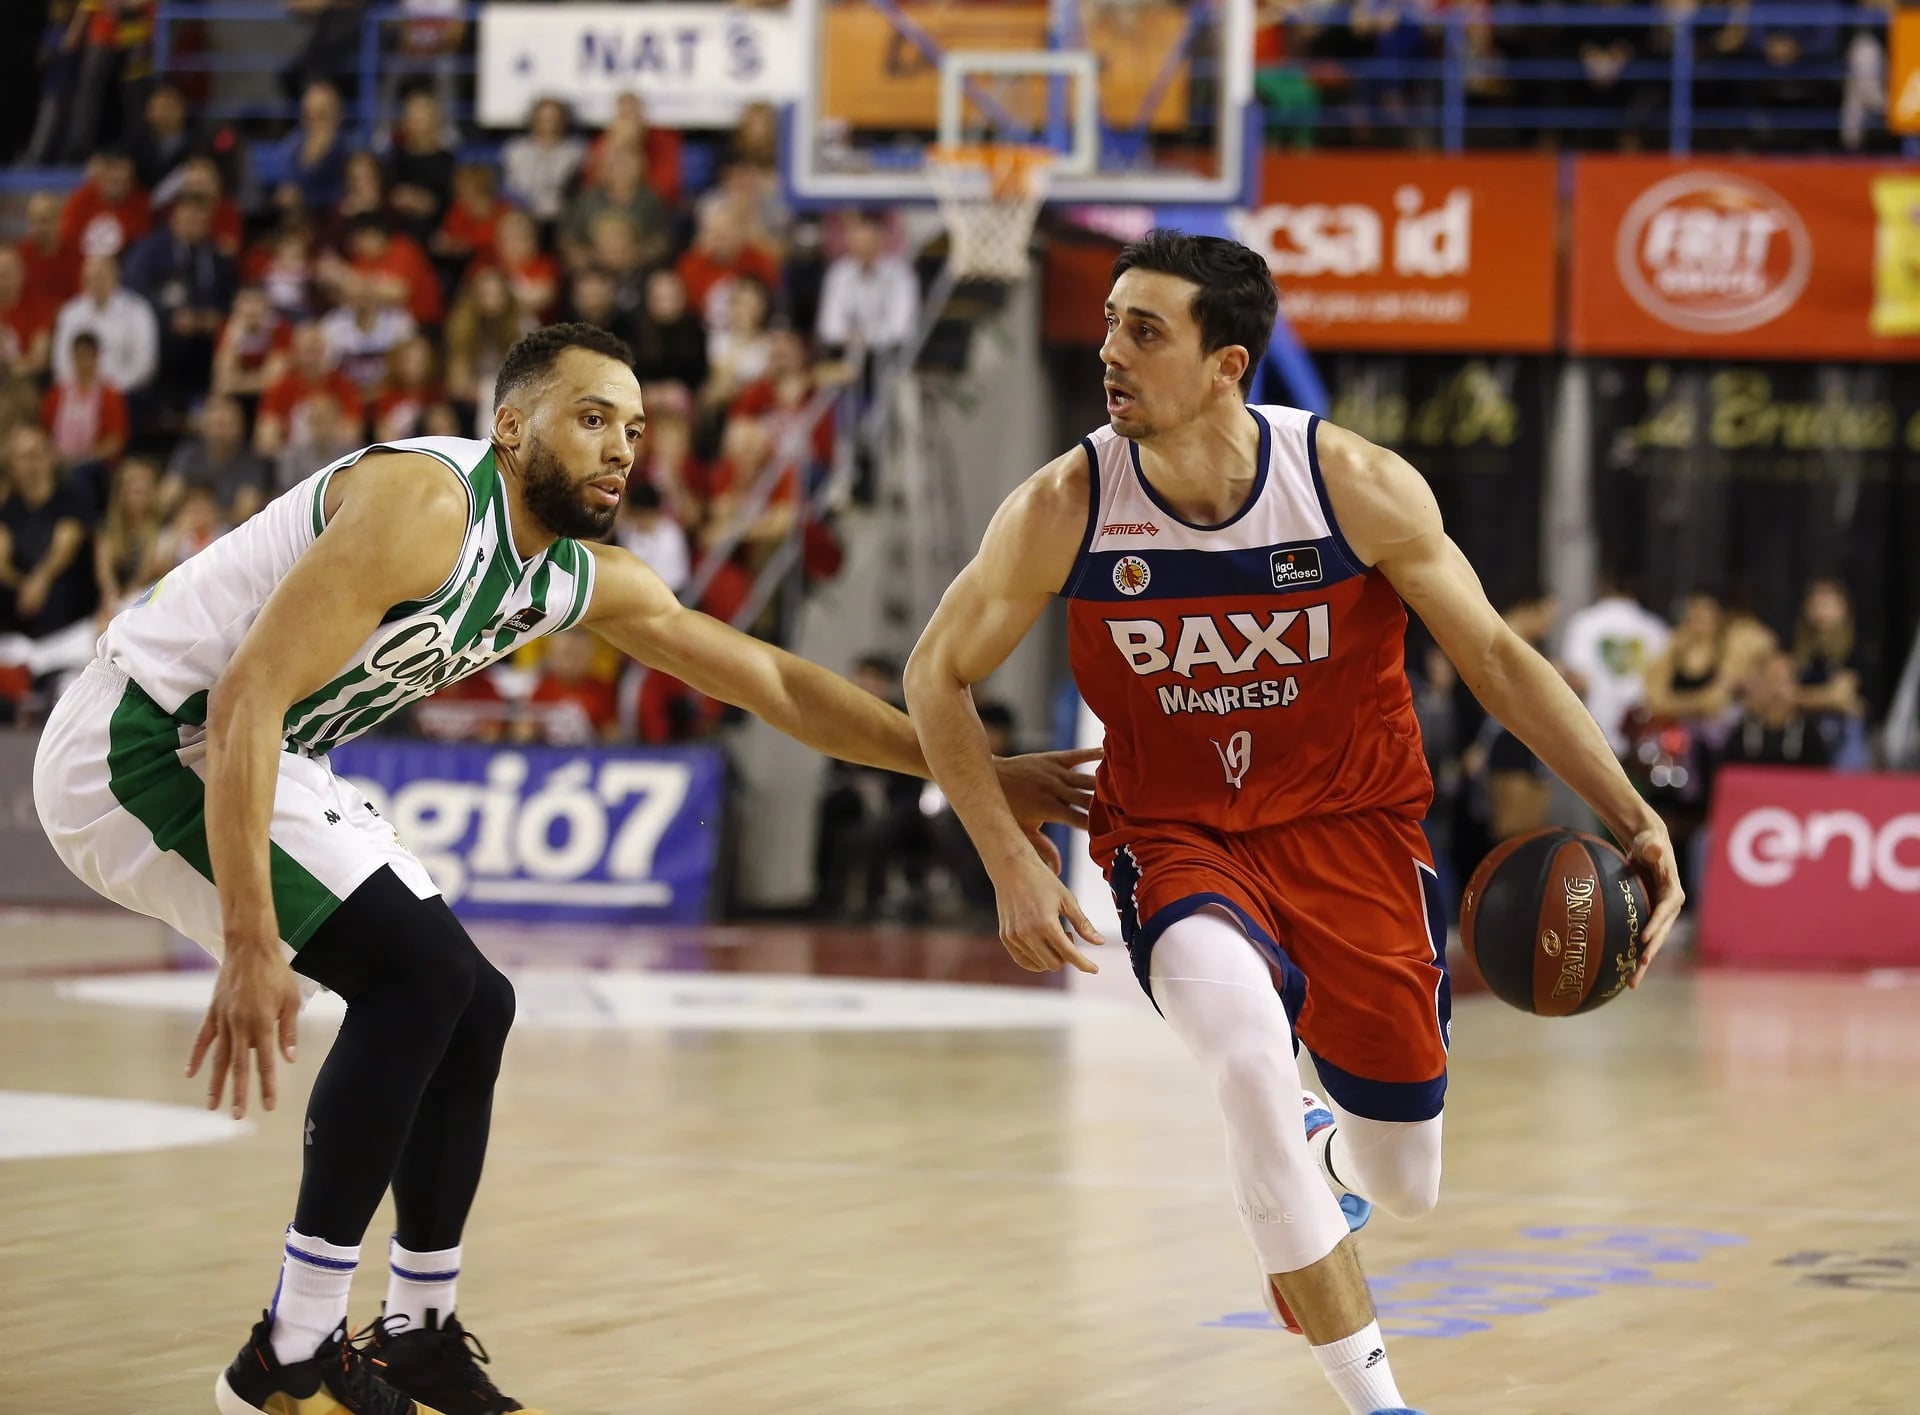 Pere Tomàs (right) in action against Real Betis in the Liga ACB, Spain's top professional basketball league (image from Bàsquet Manresa)